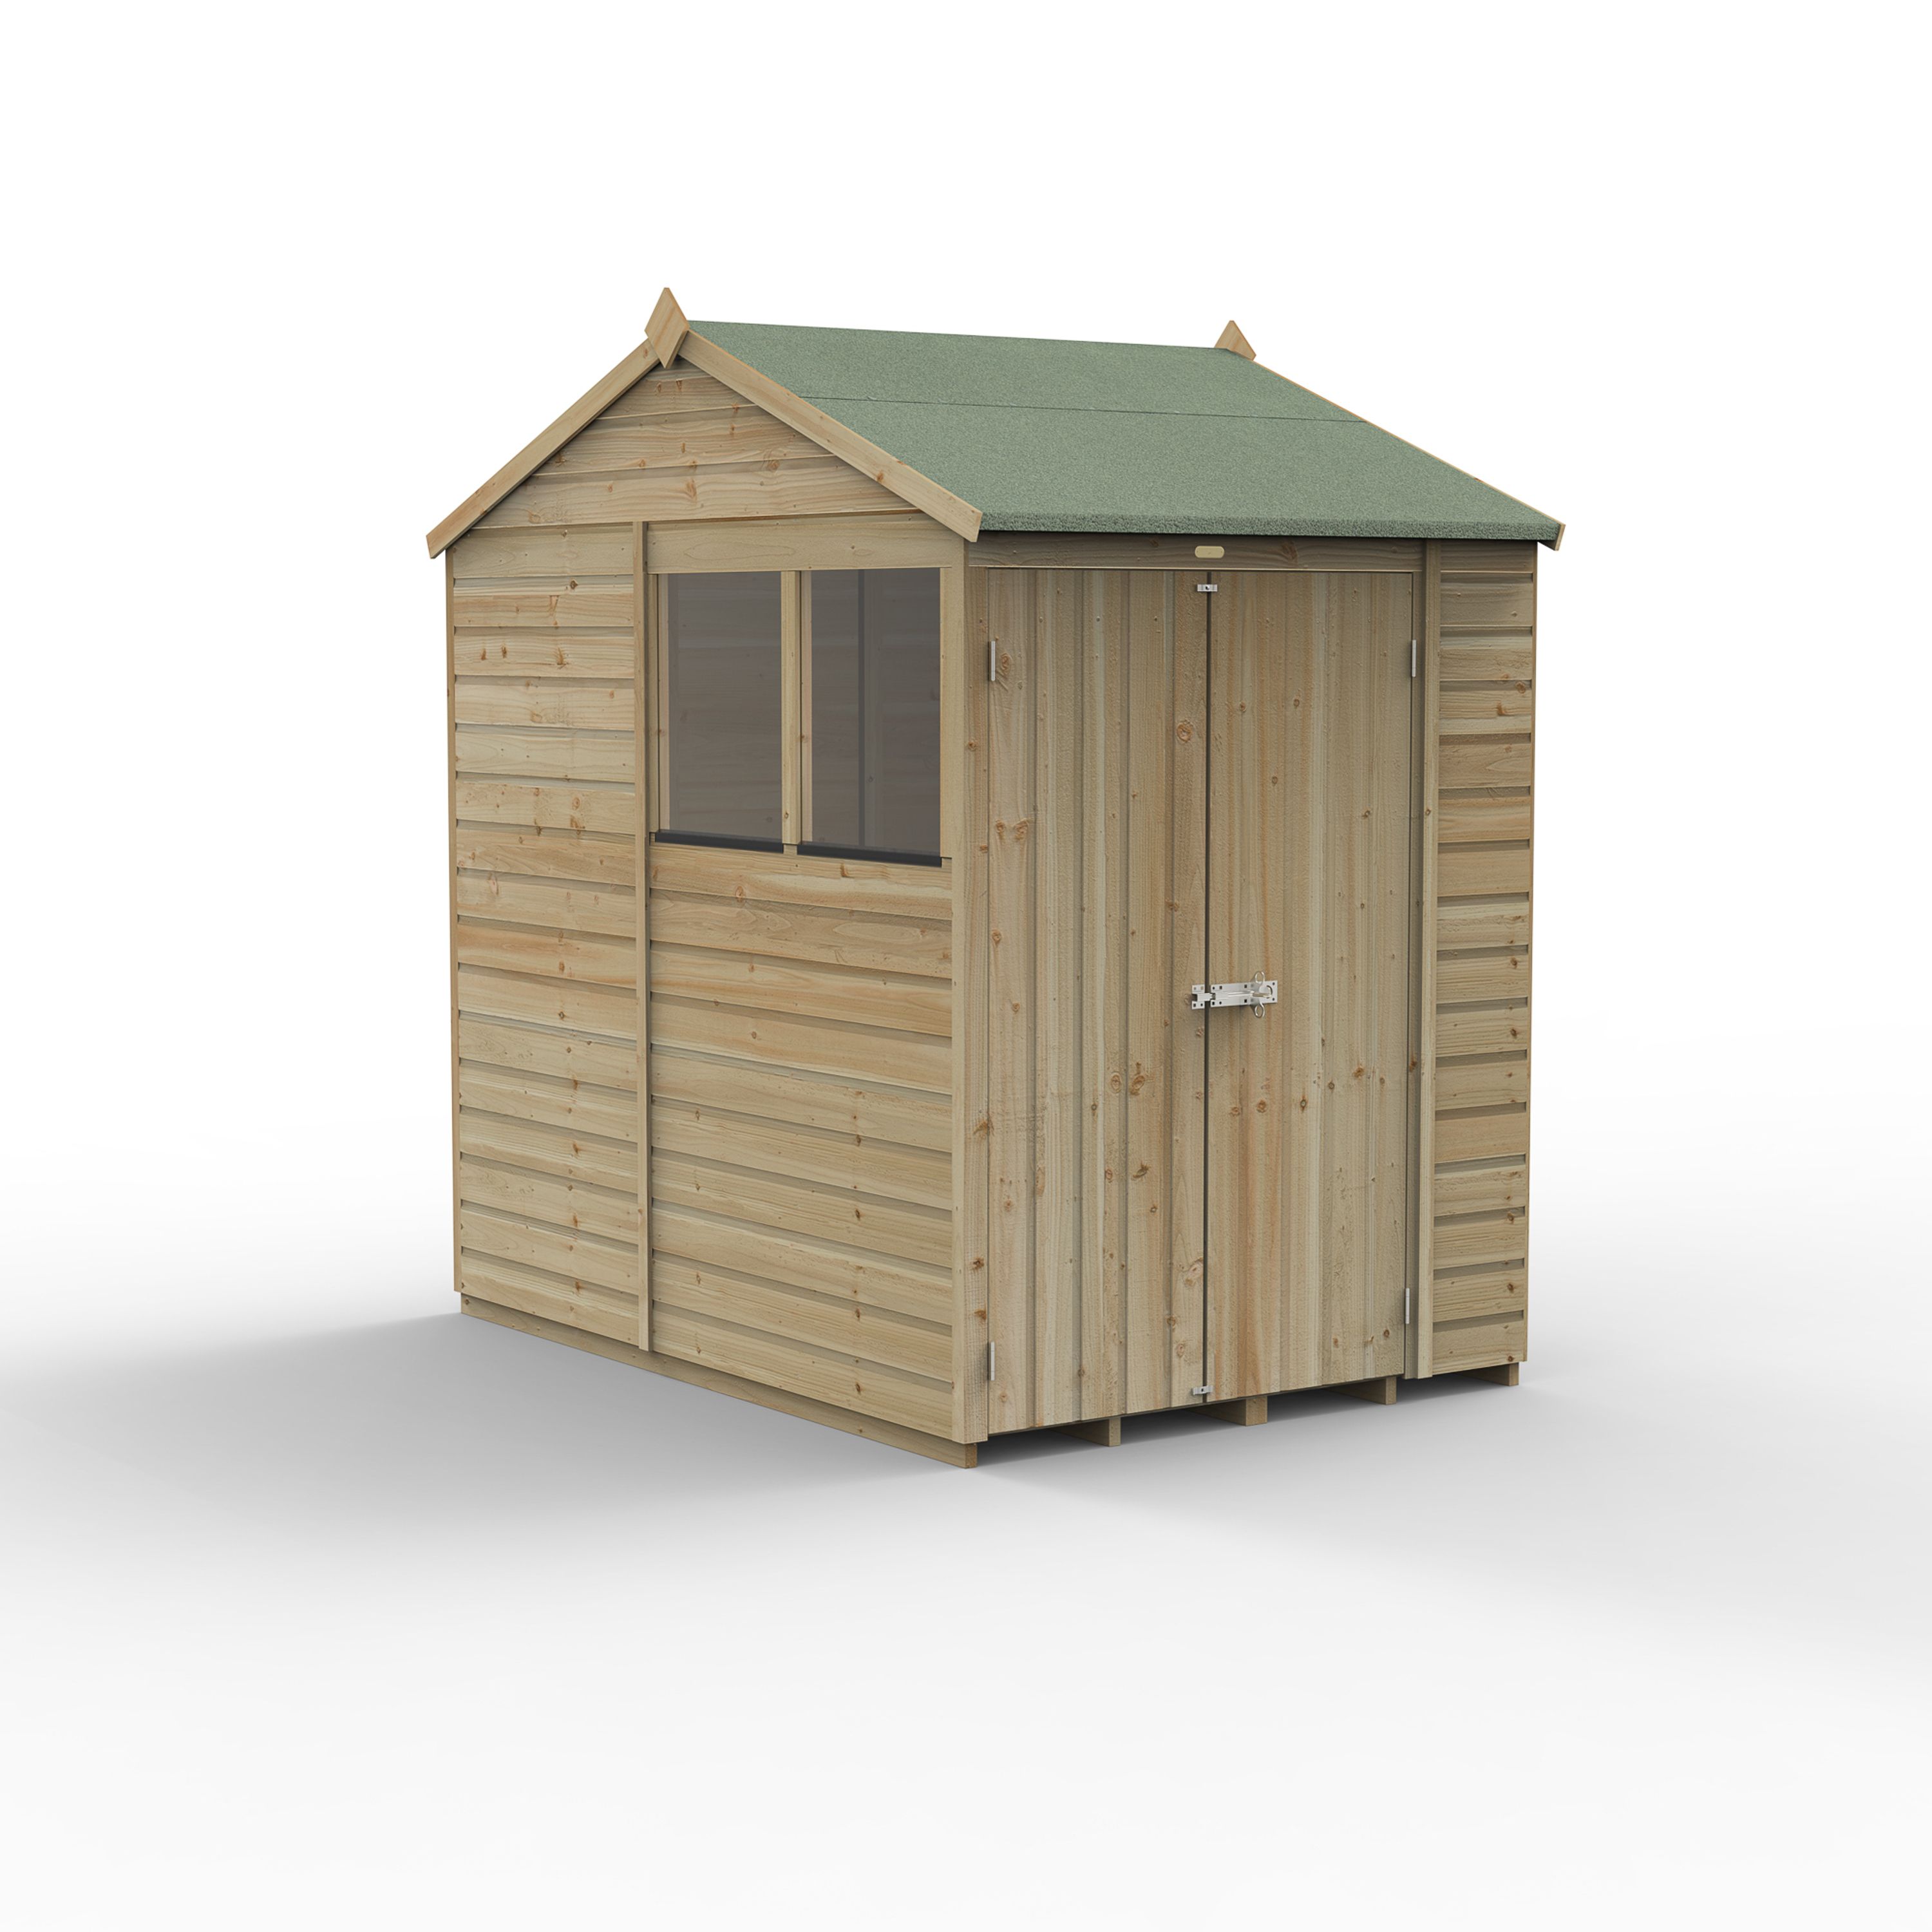 Forest Garden Beckwood 7x5 ft Reverse apex Natural timber Wooden 2 door Shed with floor & 2 windows (Base included)